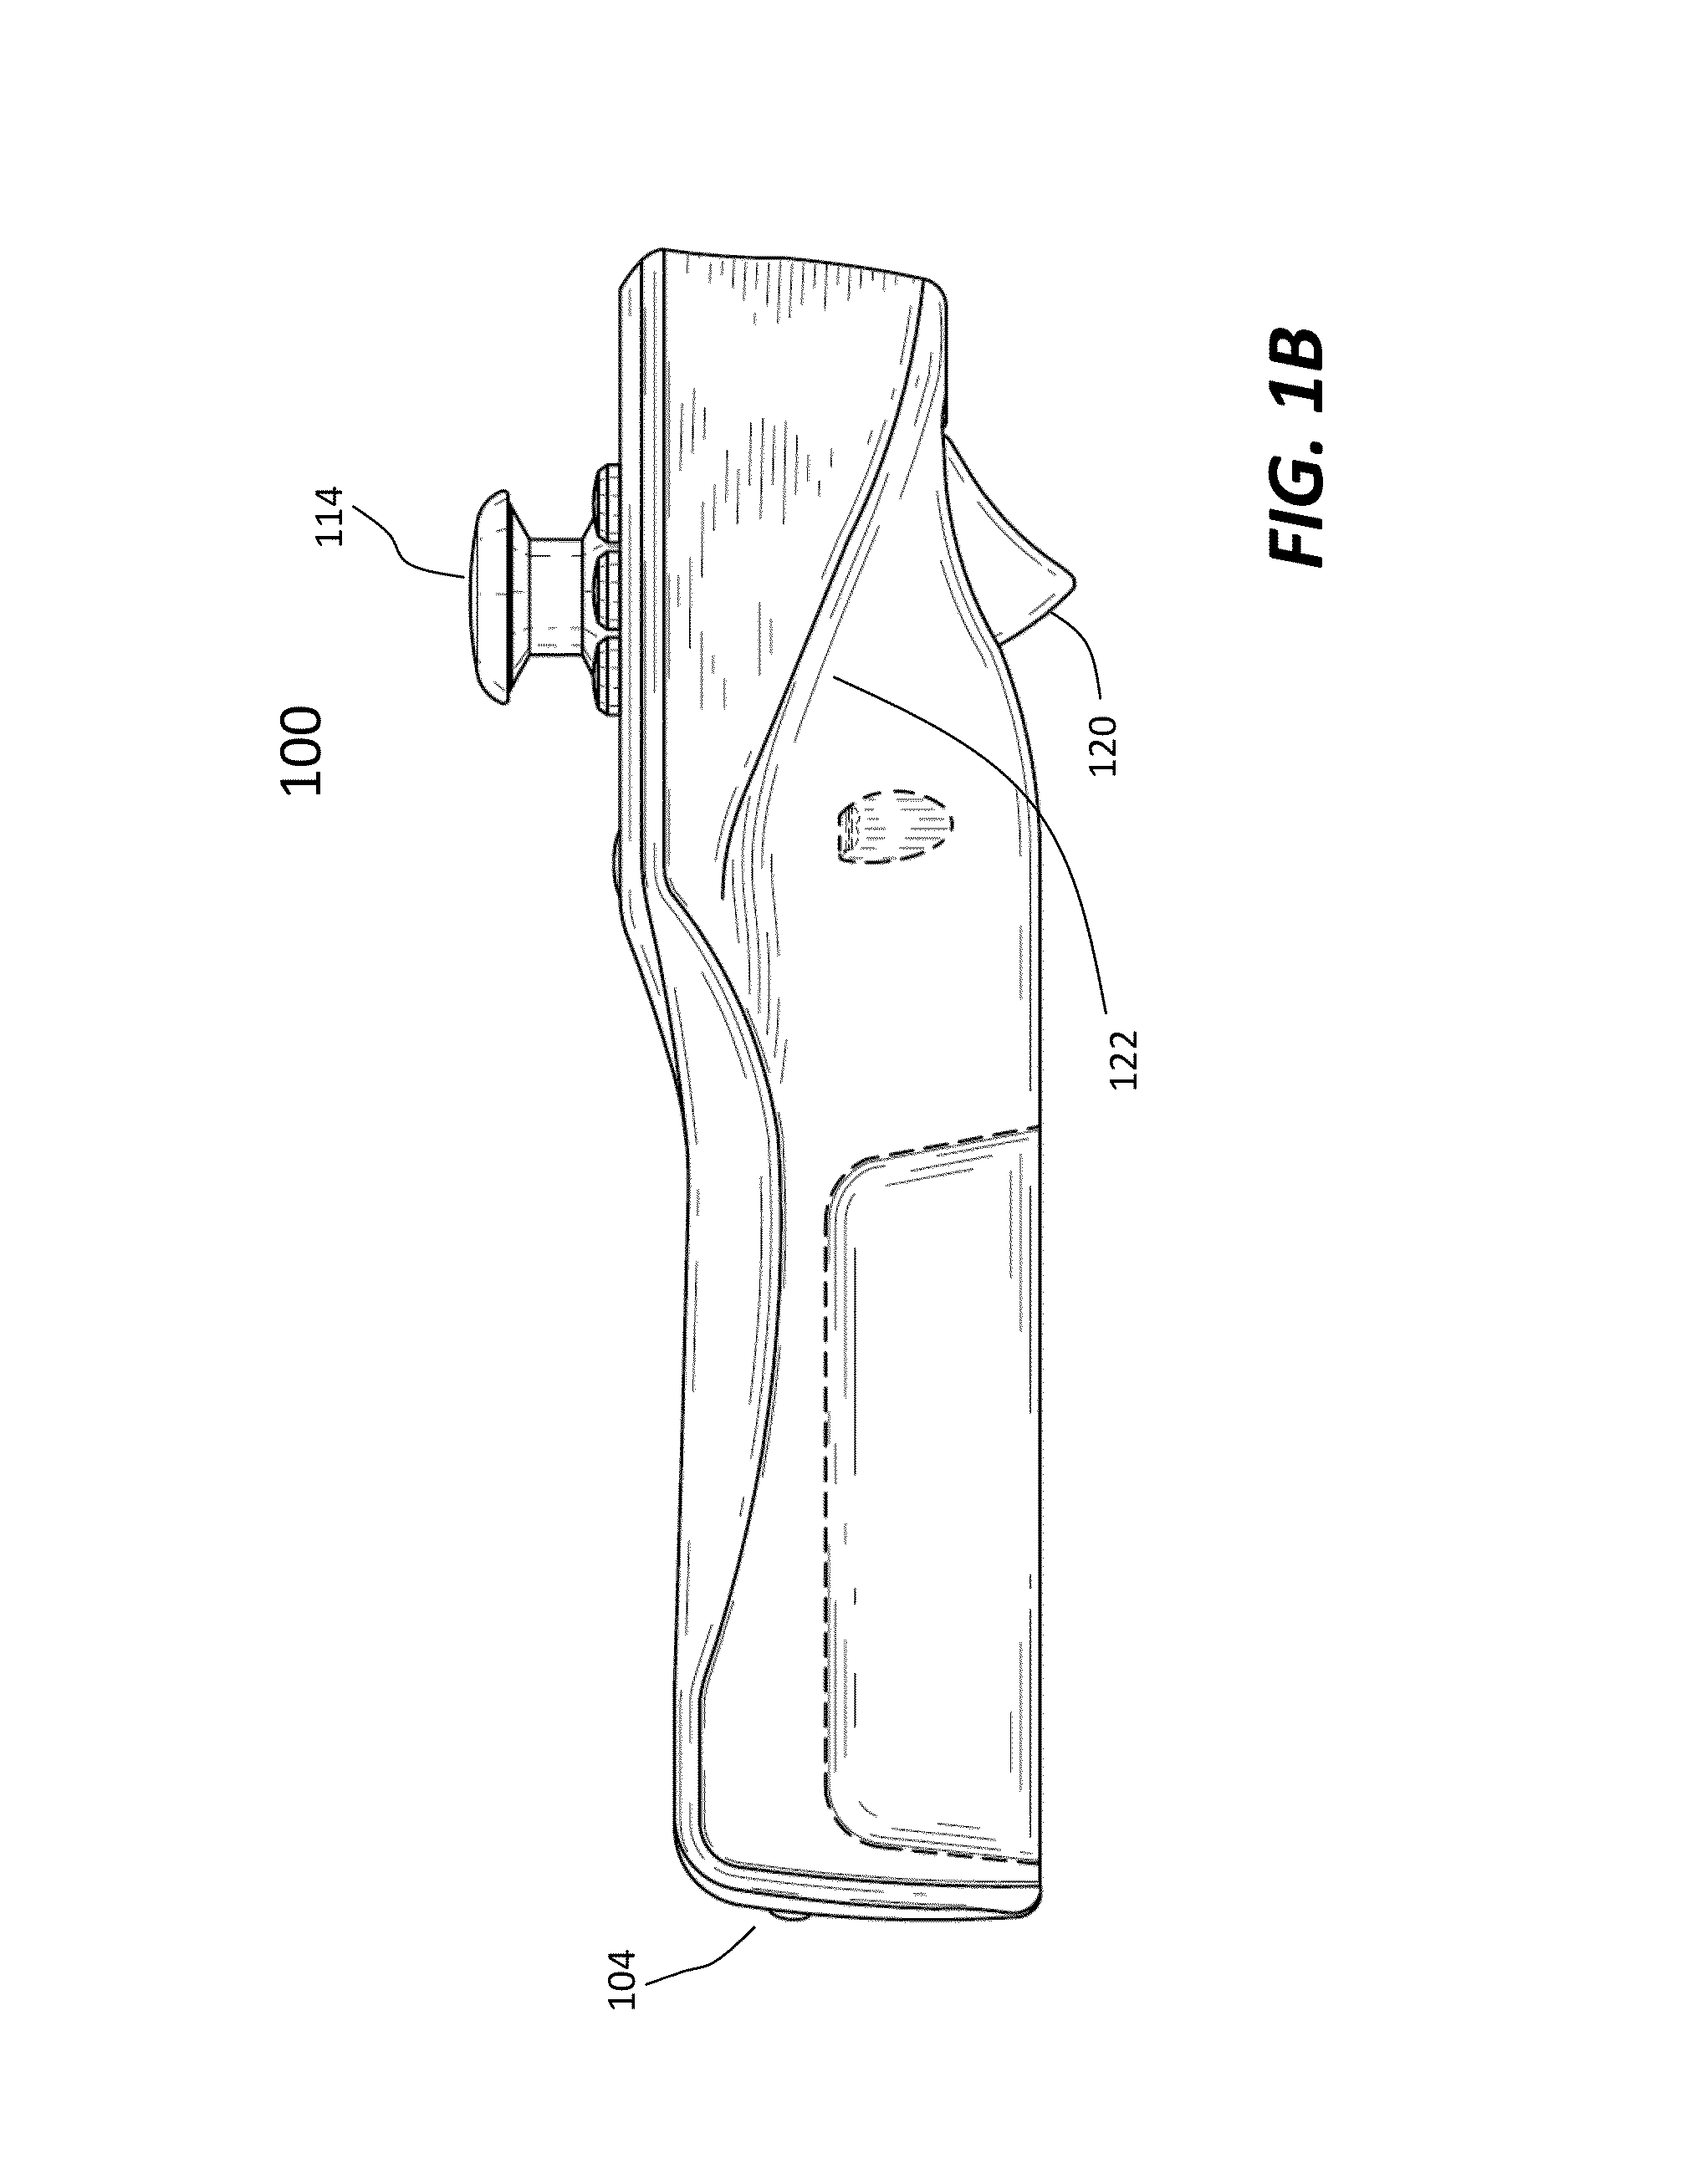 Method and system providing compatibility between two different controllers